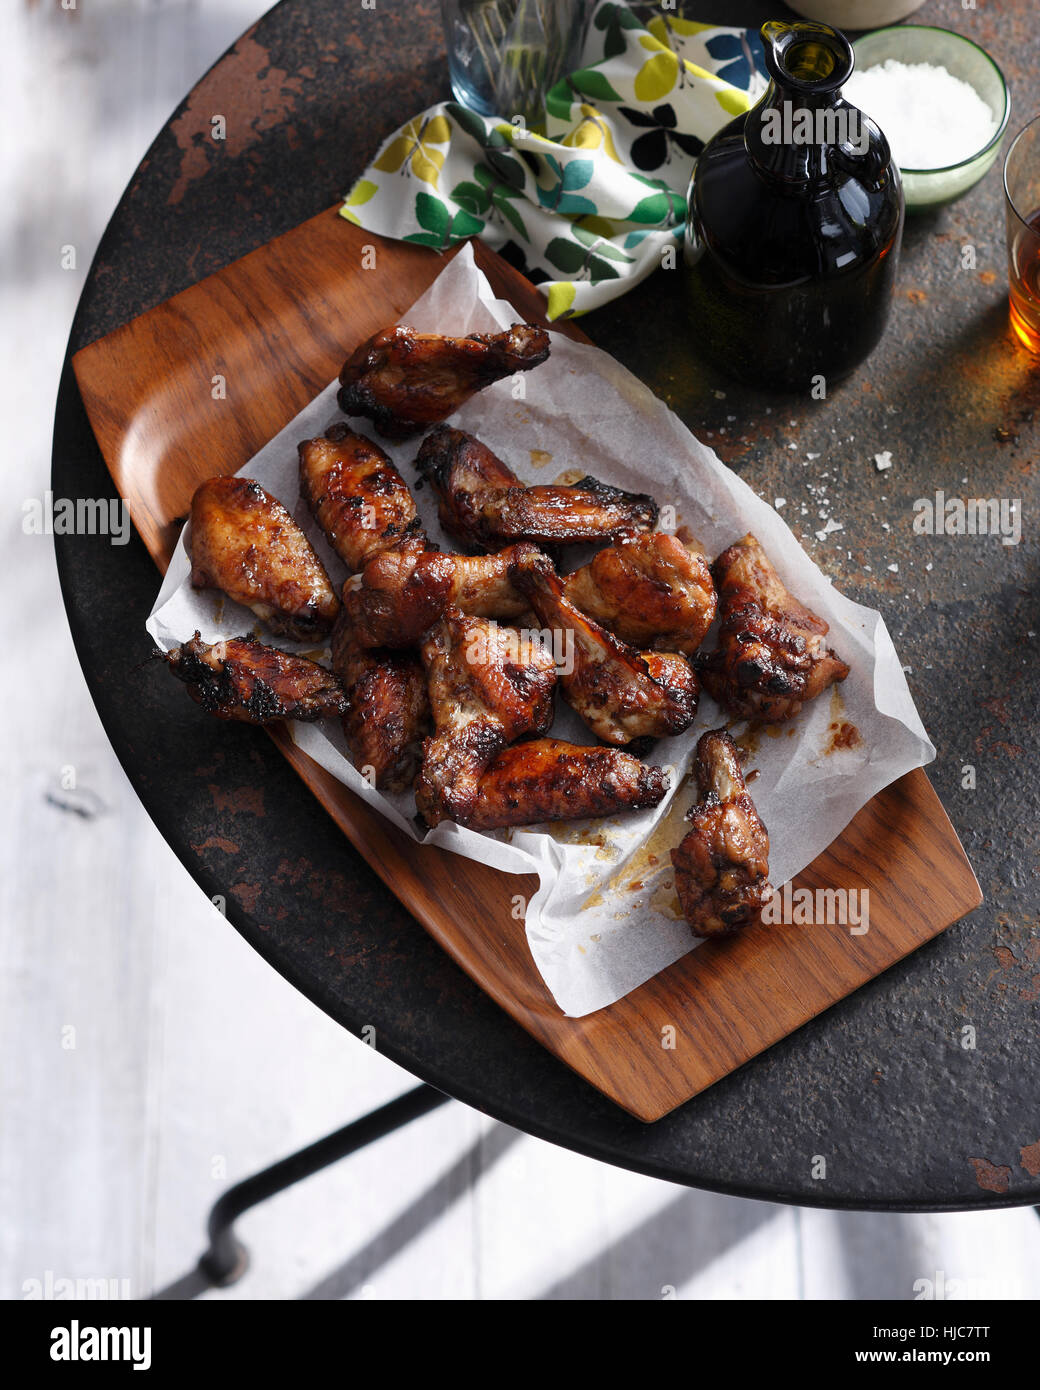 Spicy chicken wings on serving tray Stock Photo